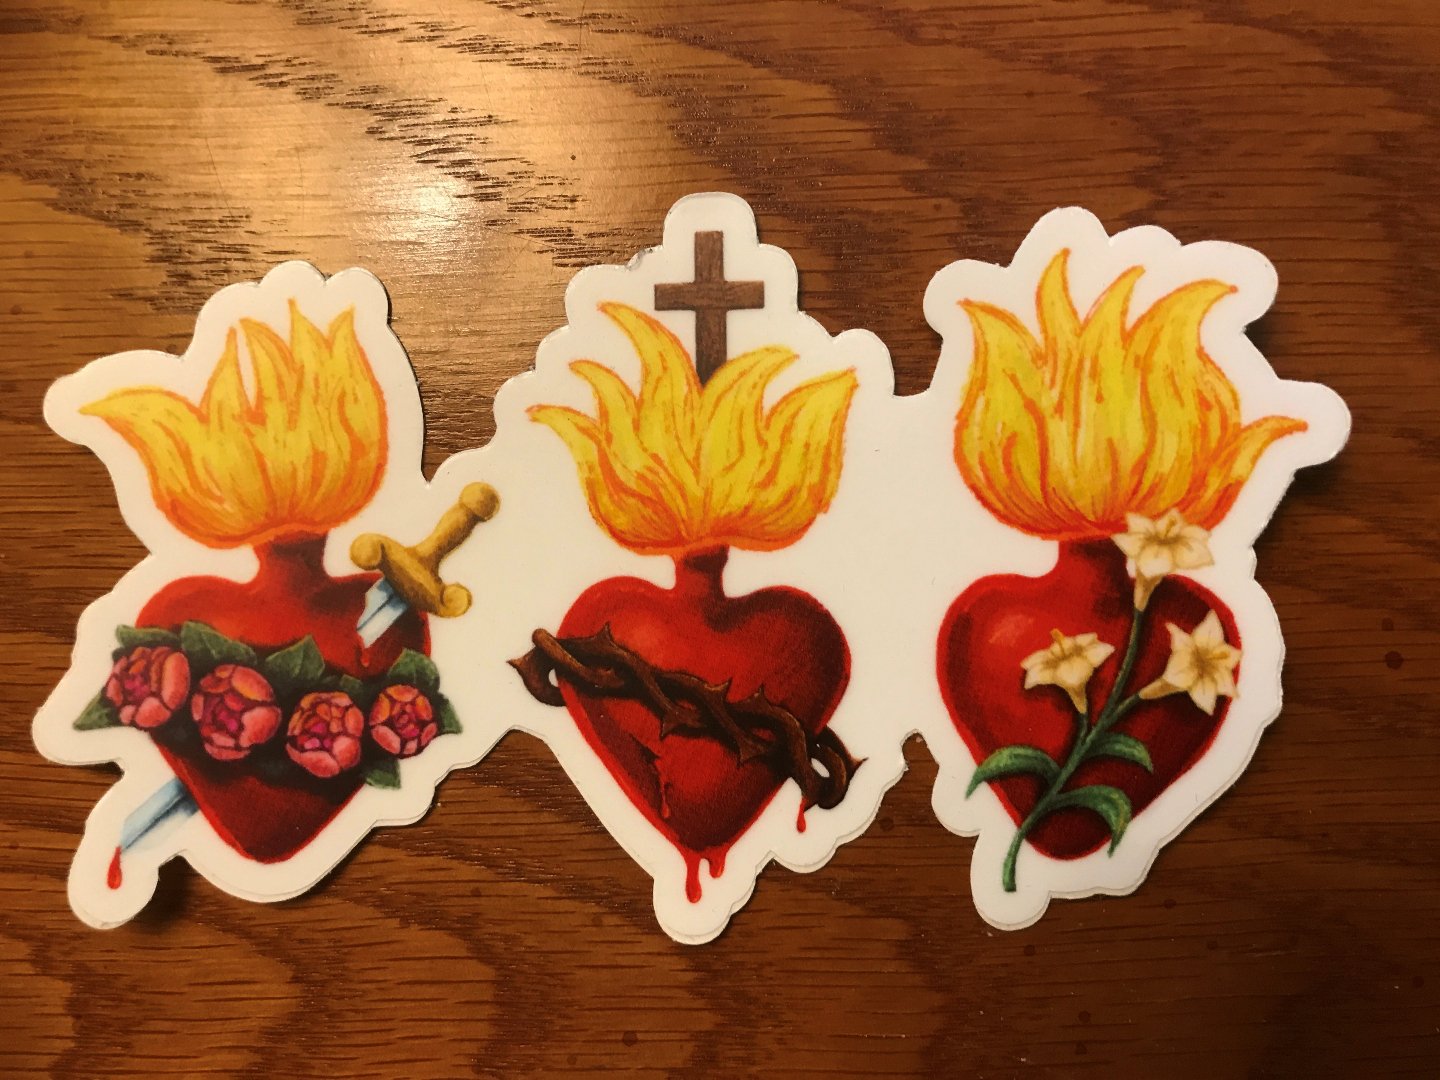 "Three hearts" sticker: Immaculate Heart of Mary, Sacred Heart of Jesus, Chaste Heart of St. Joseph